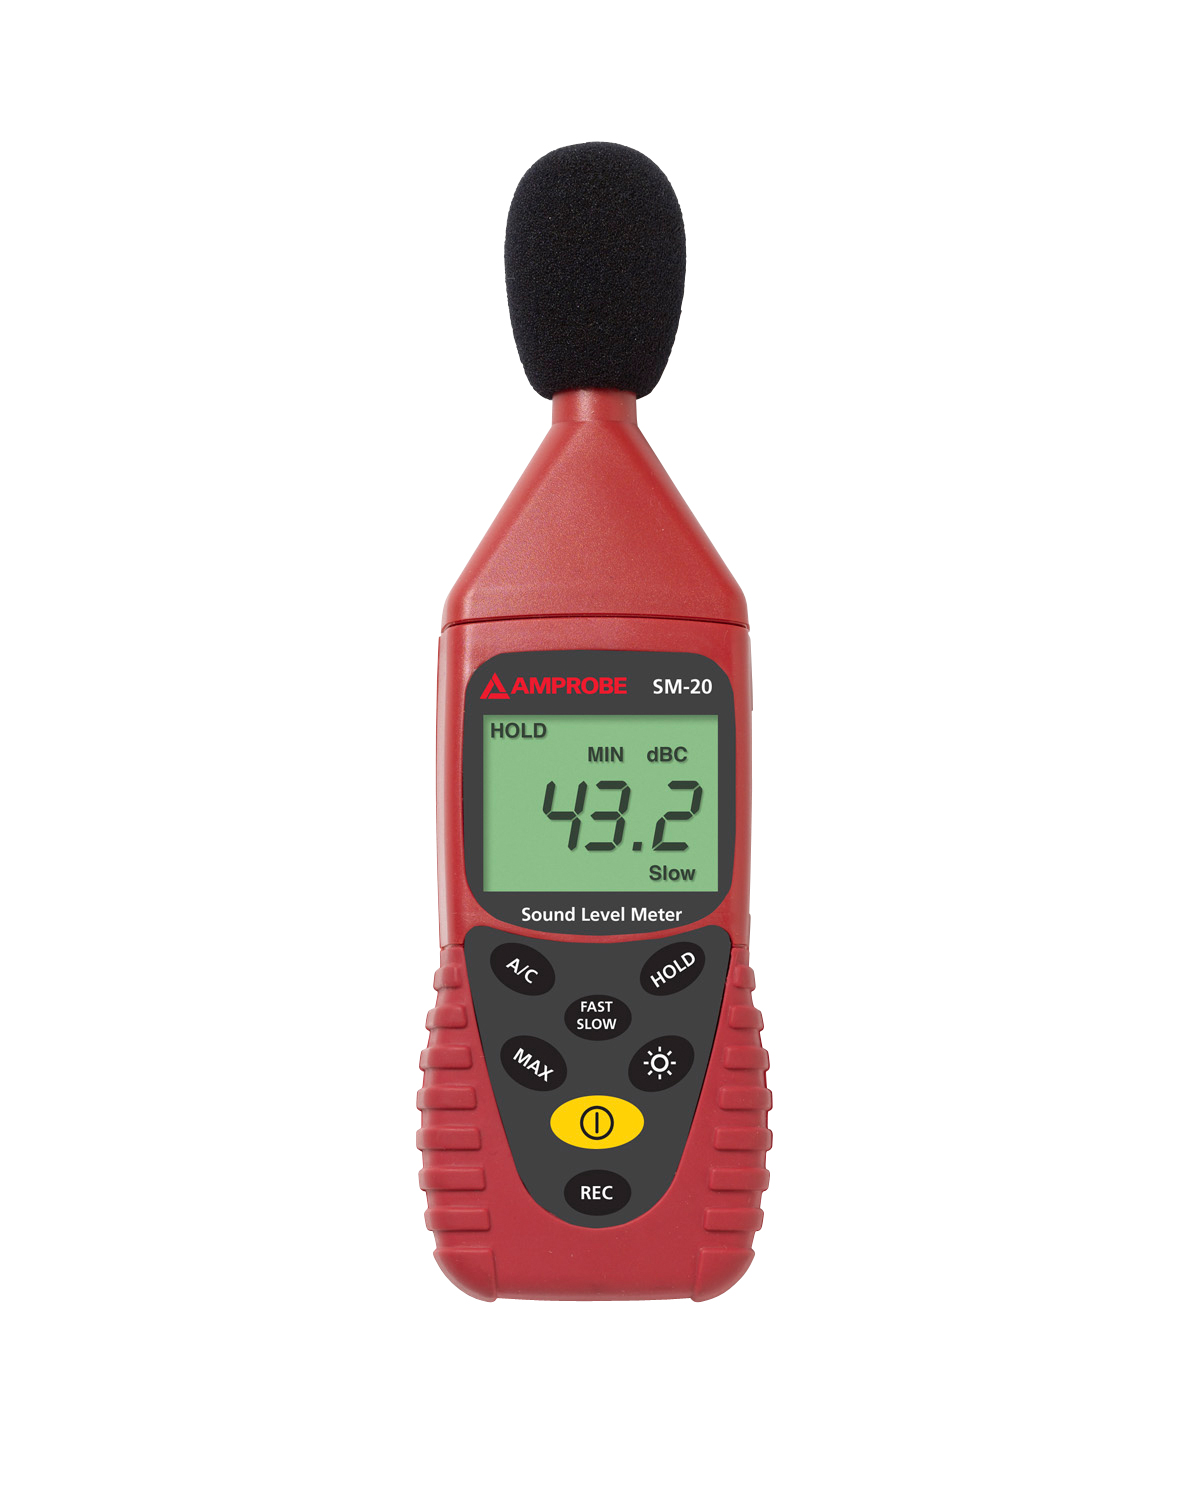 SM-20A 095969499910 The Amprobe SM-20-A Sound Meter has been designed to check compliance with safety regulations and perform acoustic analysis by safety engineers, health, industrial and safety offices as well as quality control. The SM-20-A offers a PC interface. They use two different weighting filters required by the IEC651 and ANSI S1.4 Type 2 for audio filtering. The A weighting is for general noise sound level and the C weighting is for measuring sound level of acoustic material control in various environments (ie 94dB 1 kHz etc).